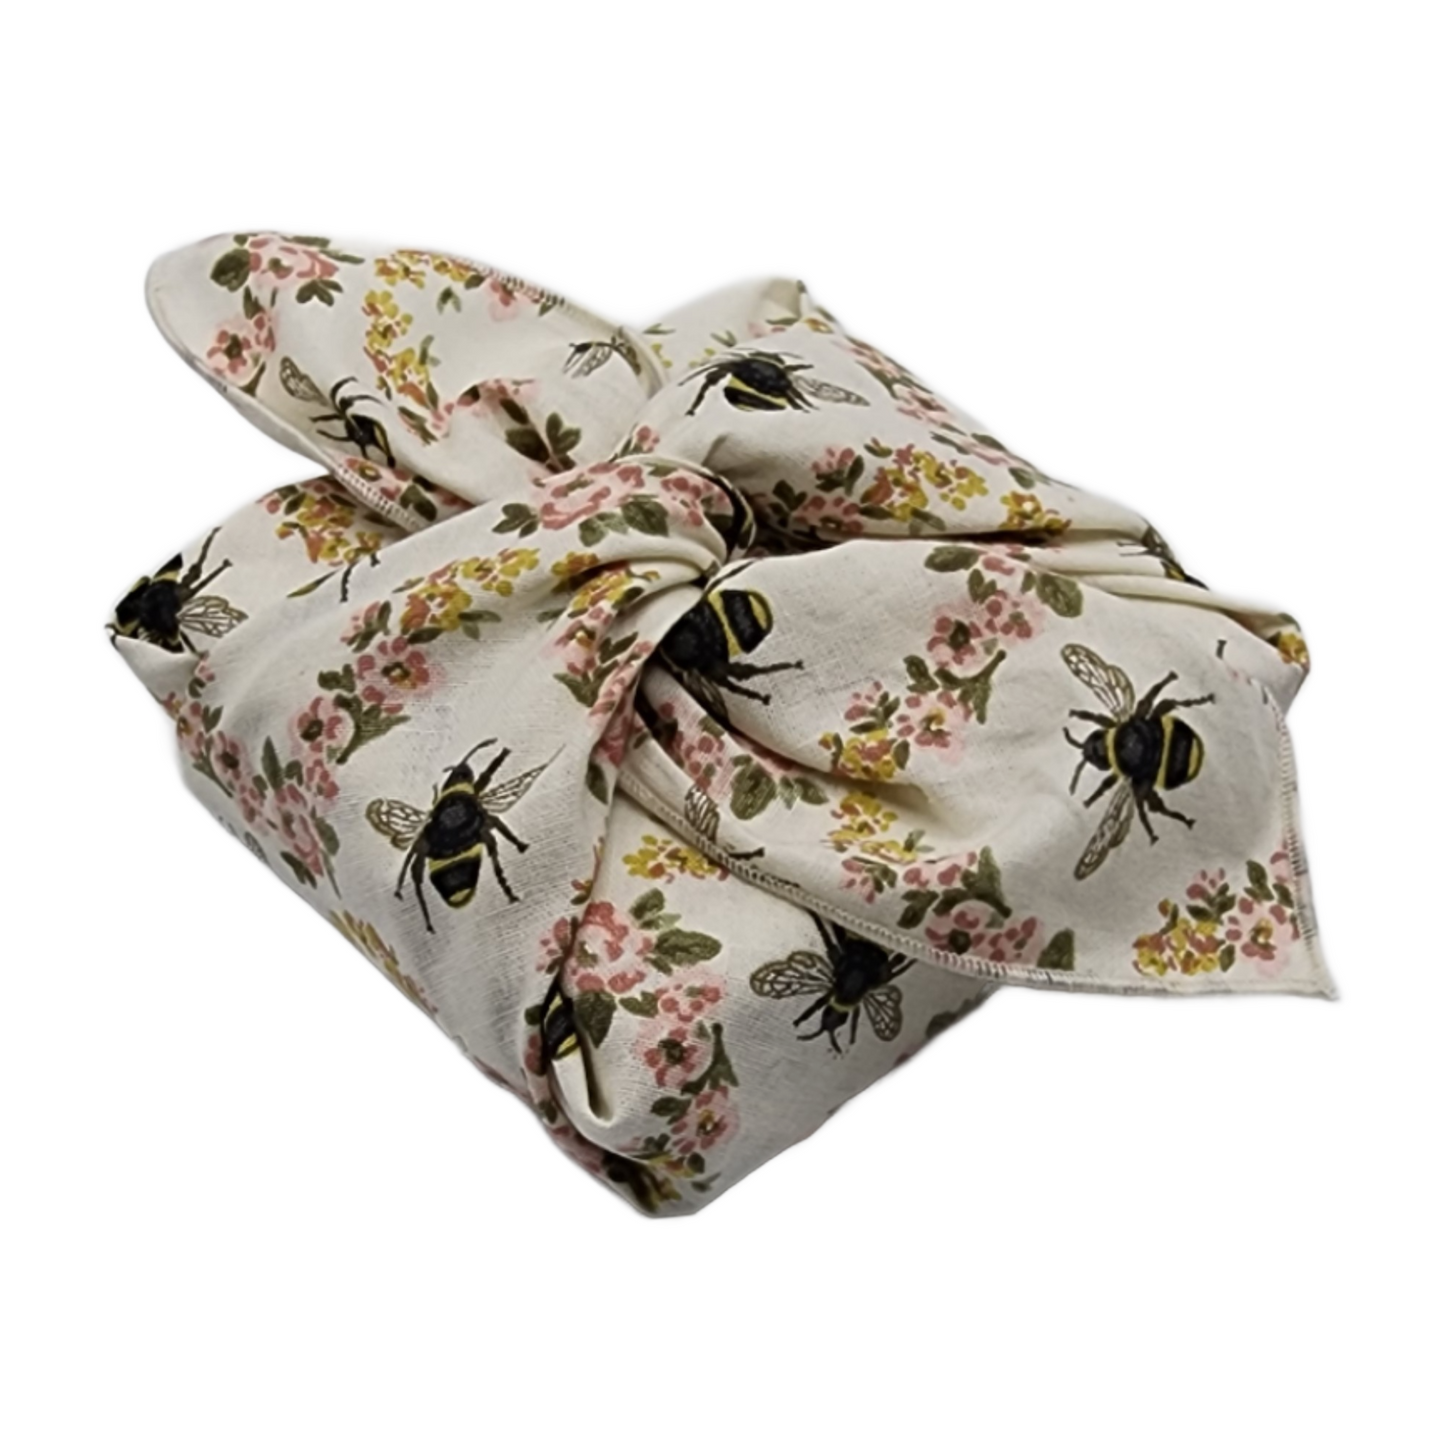 Furoshiki Fabric Gift Wrap - Queen Bee Ivory Floral